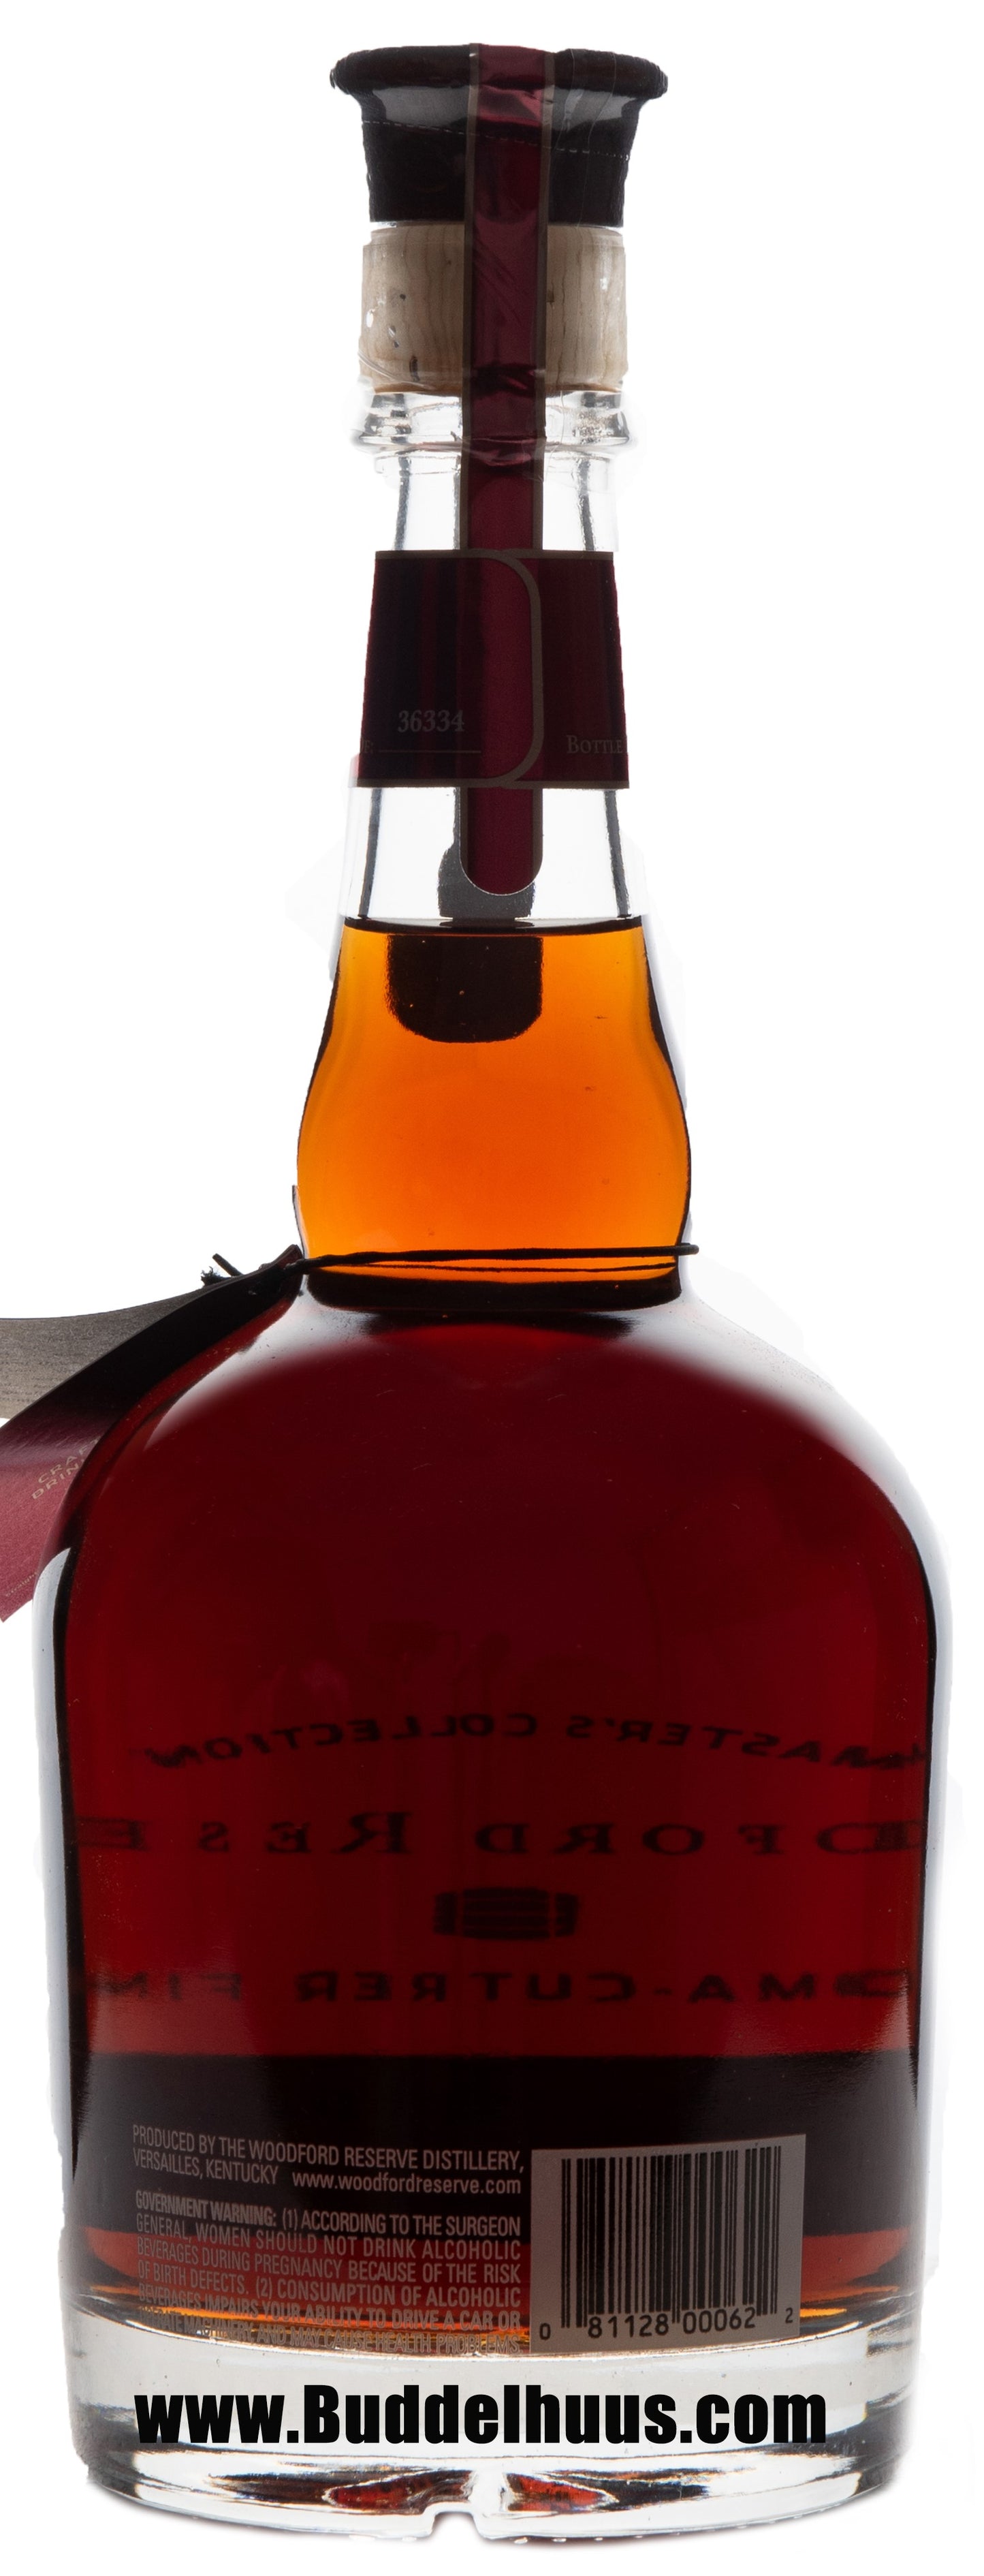 Woodford Reserve Master Collection Sonoma Cutrer Finish 2014